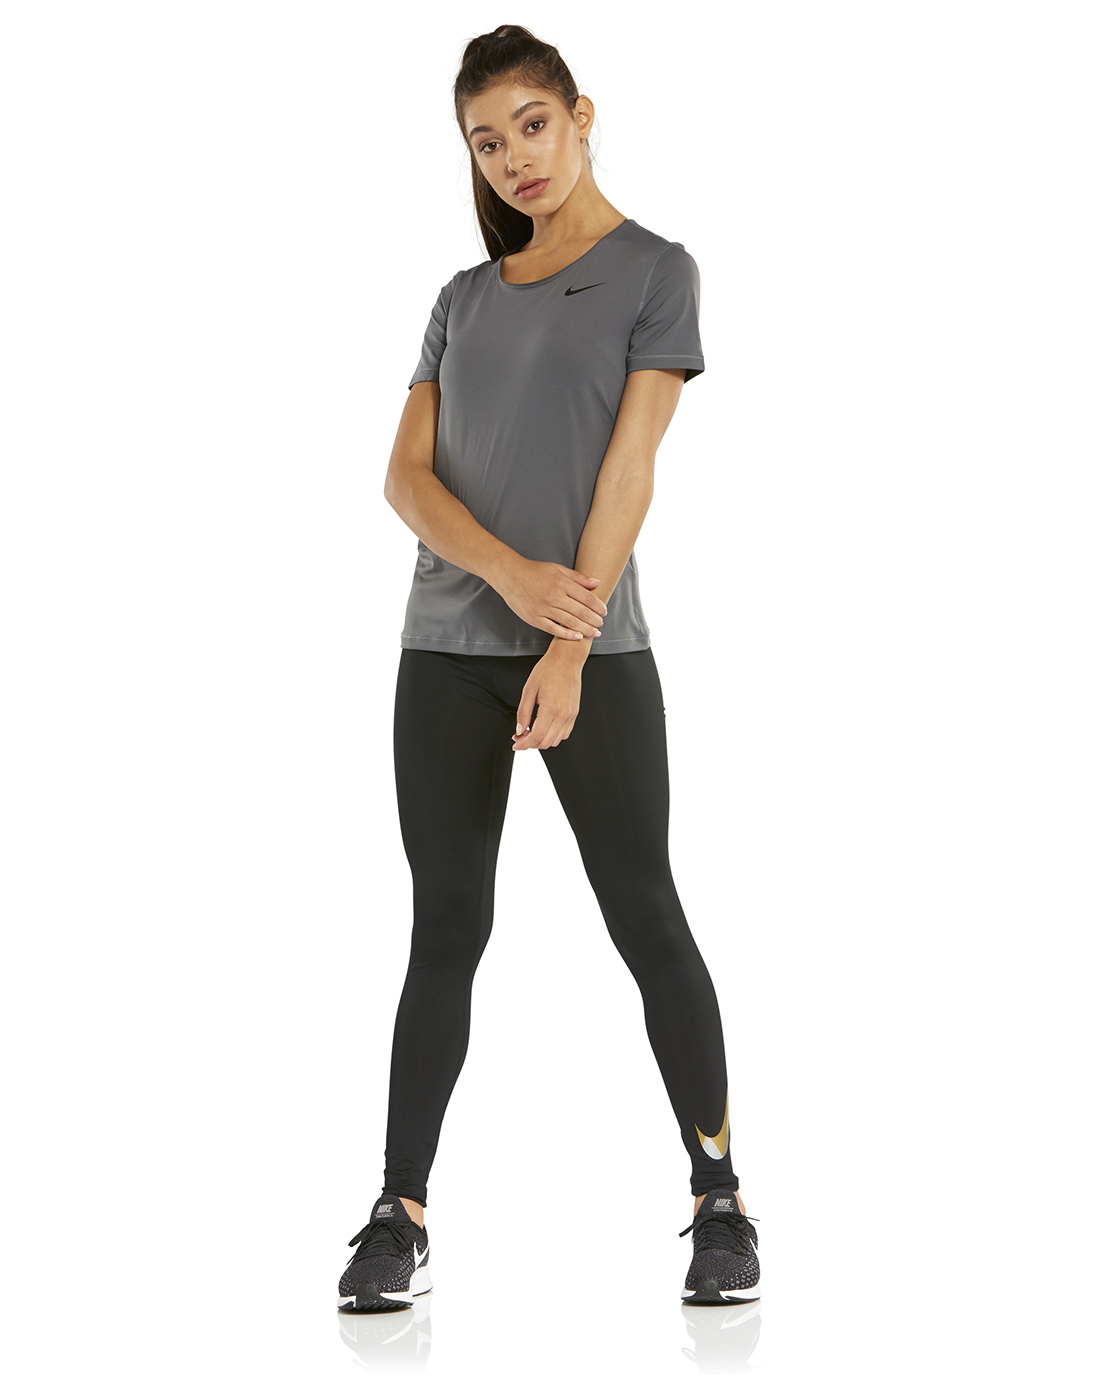 nike running tights size guide